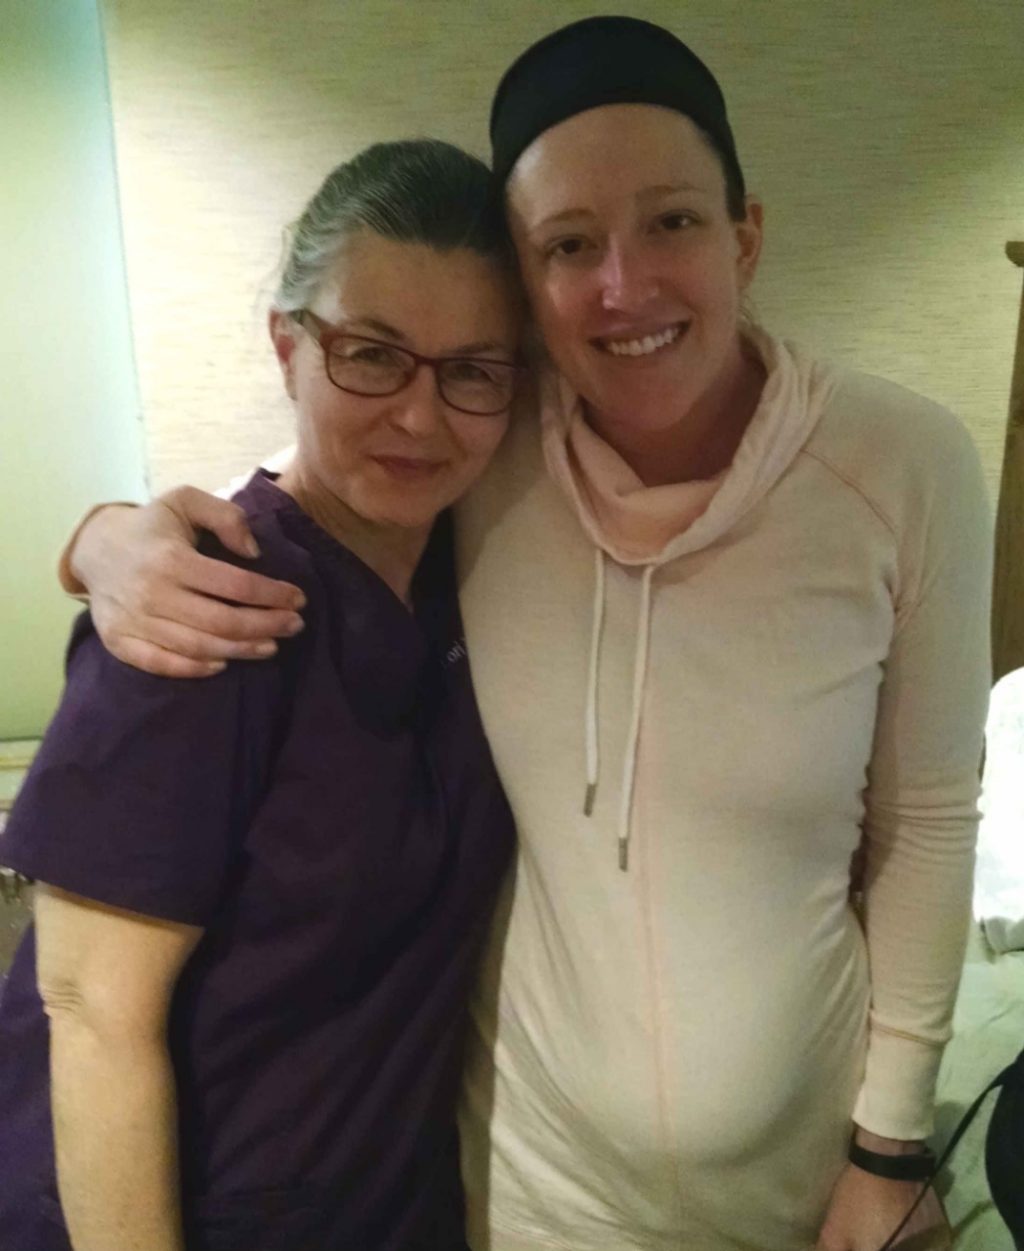 Lori Link, certified nurse midwife, with Caitlin Kissee as she prepared to give birth for the first time.